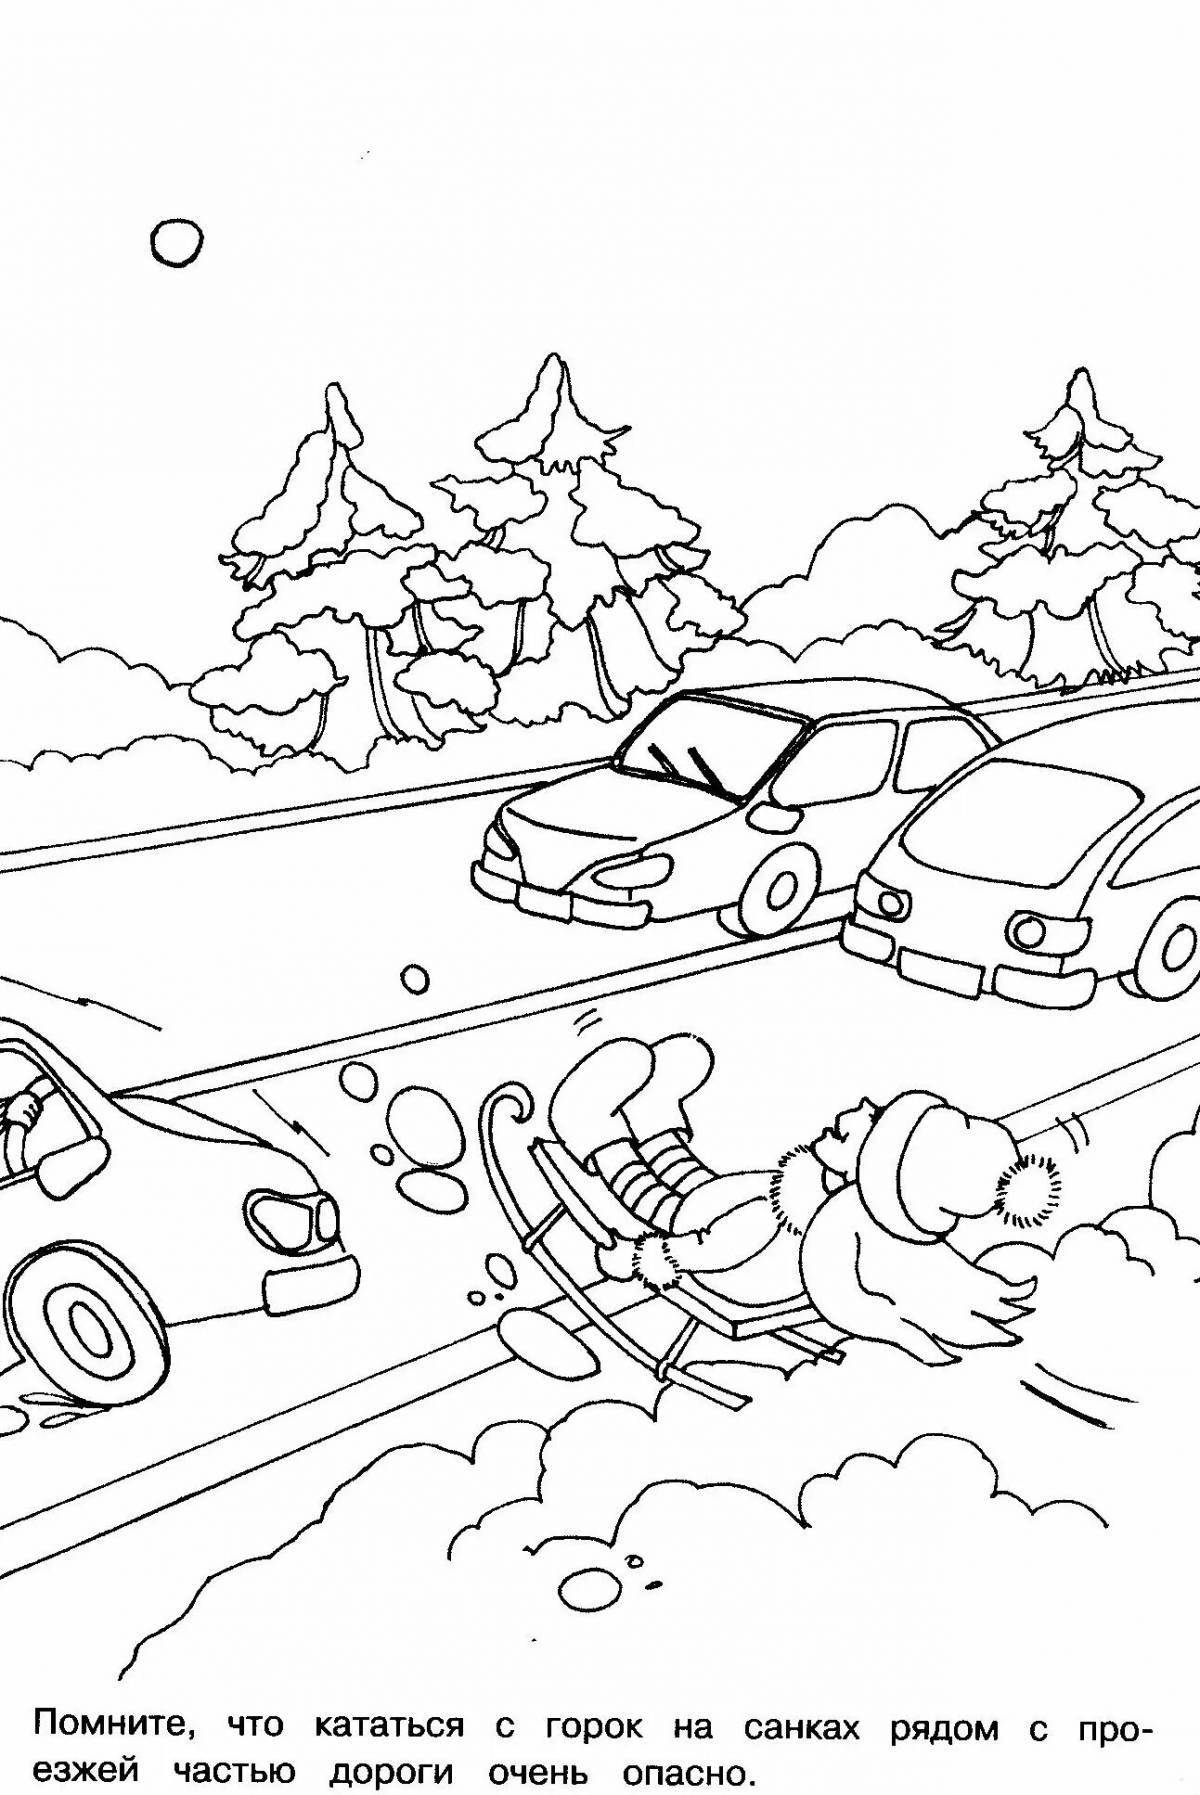 Complex safety rules coloring book